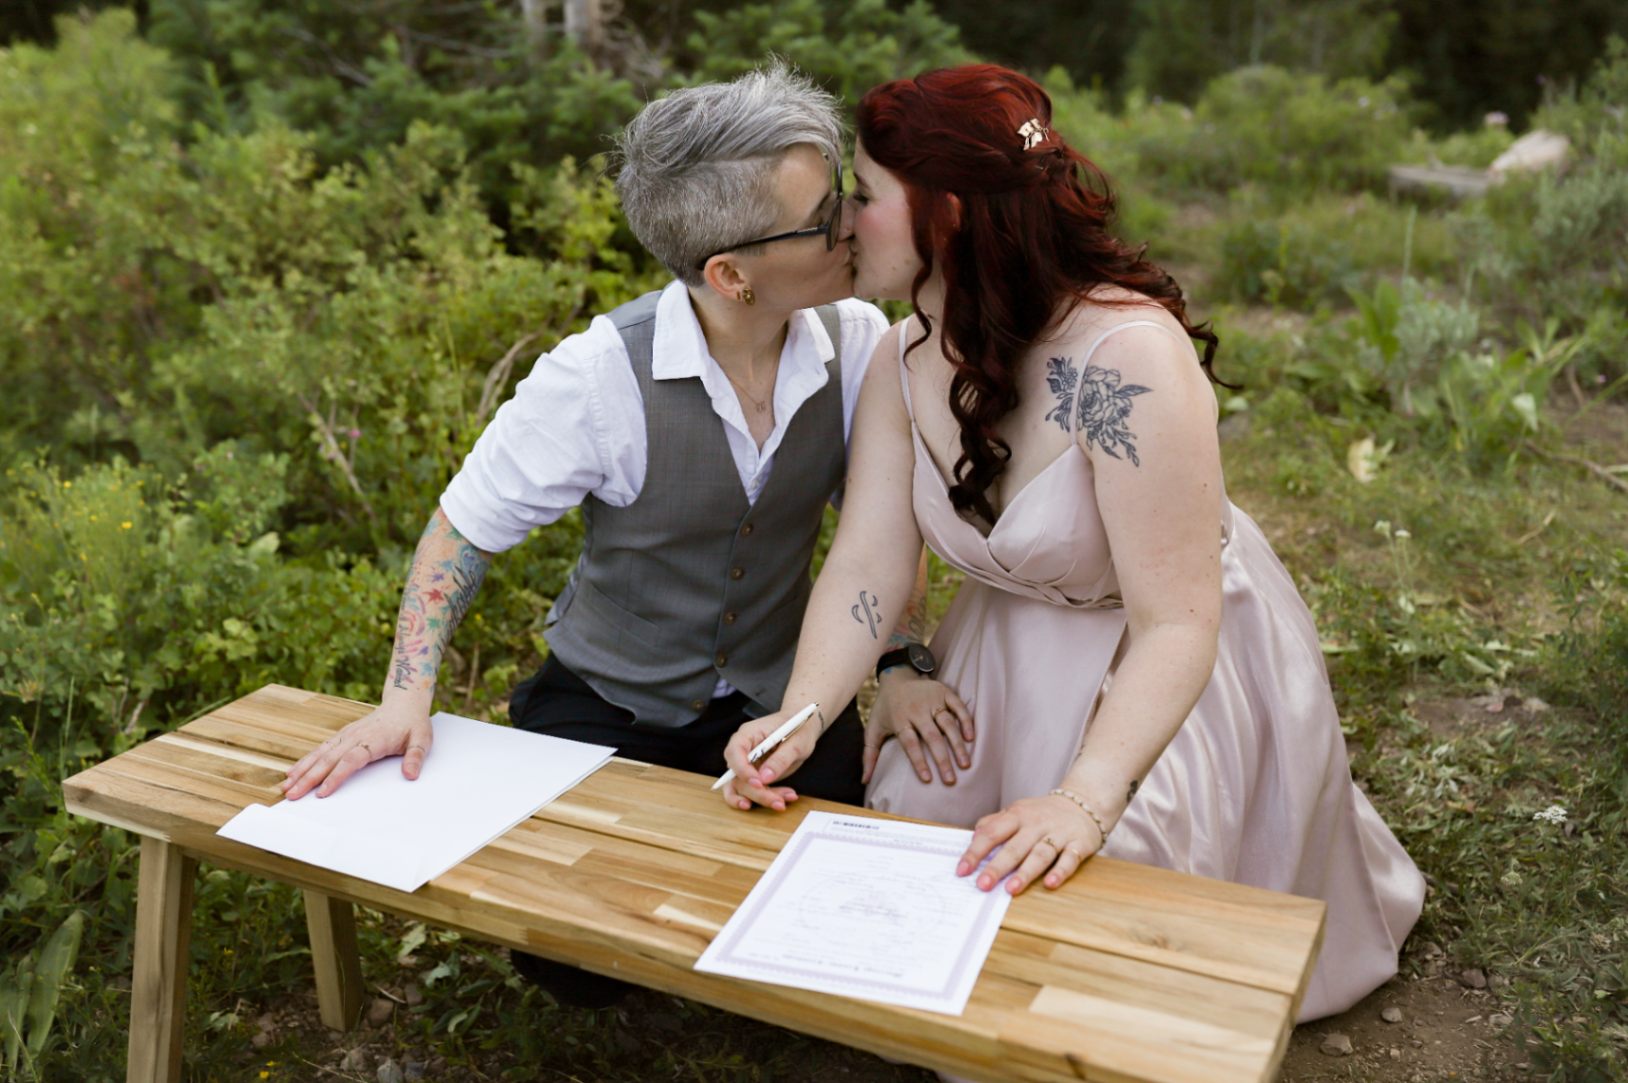 Two brides (both white, one with short gray hair, one with long dark red hair) kiss after signing their marriage certificate